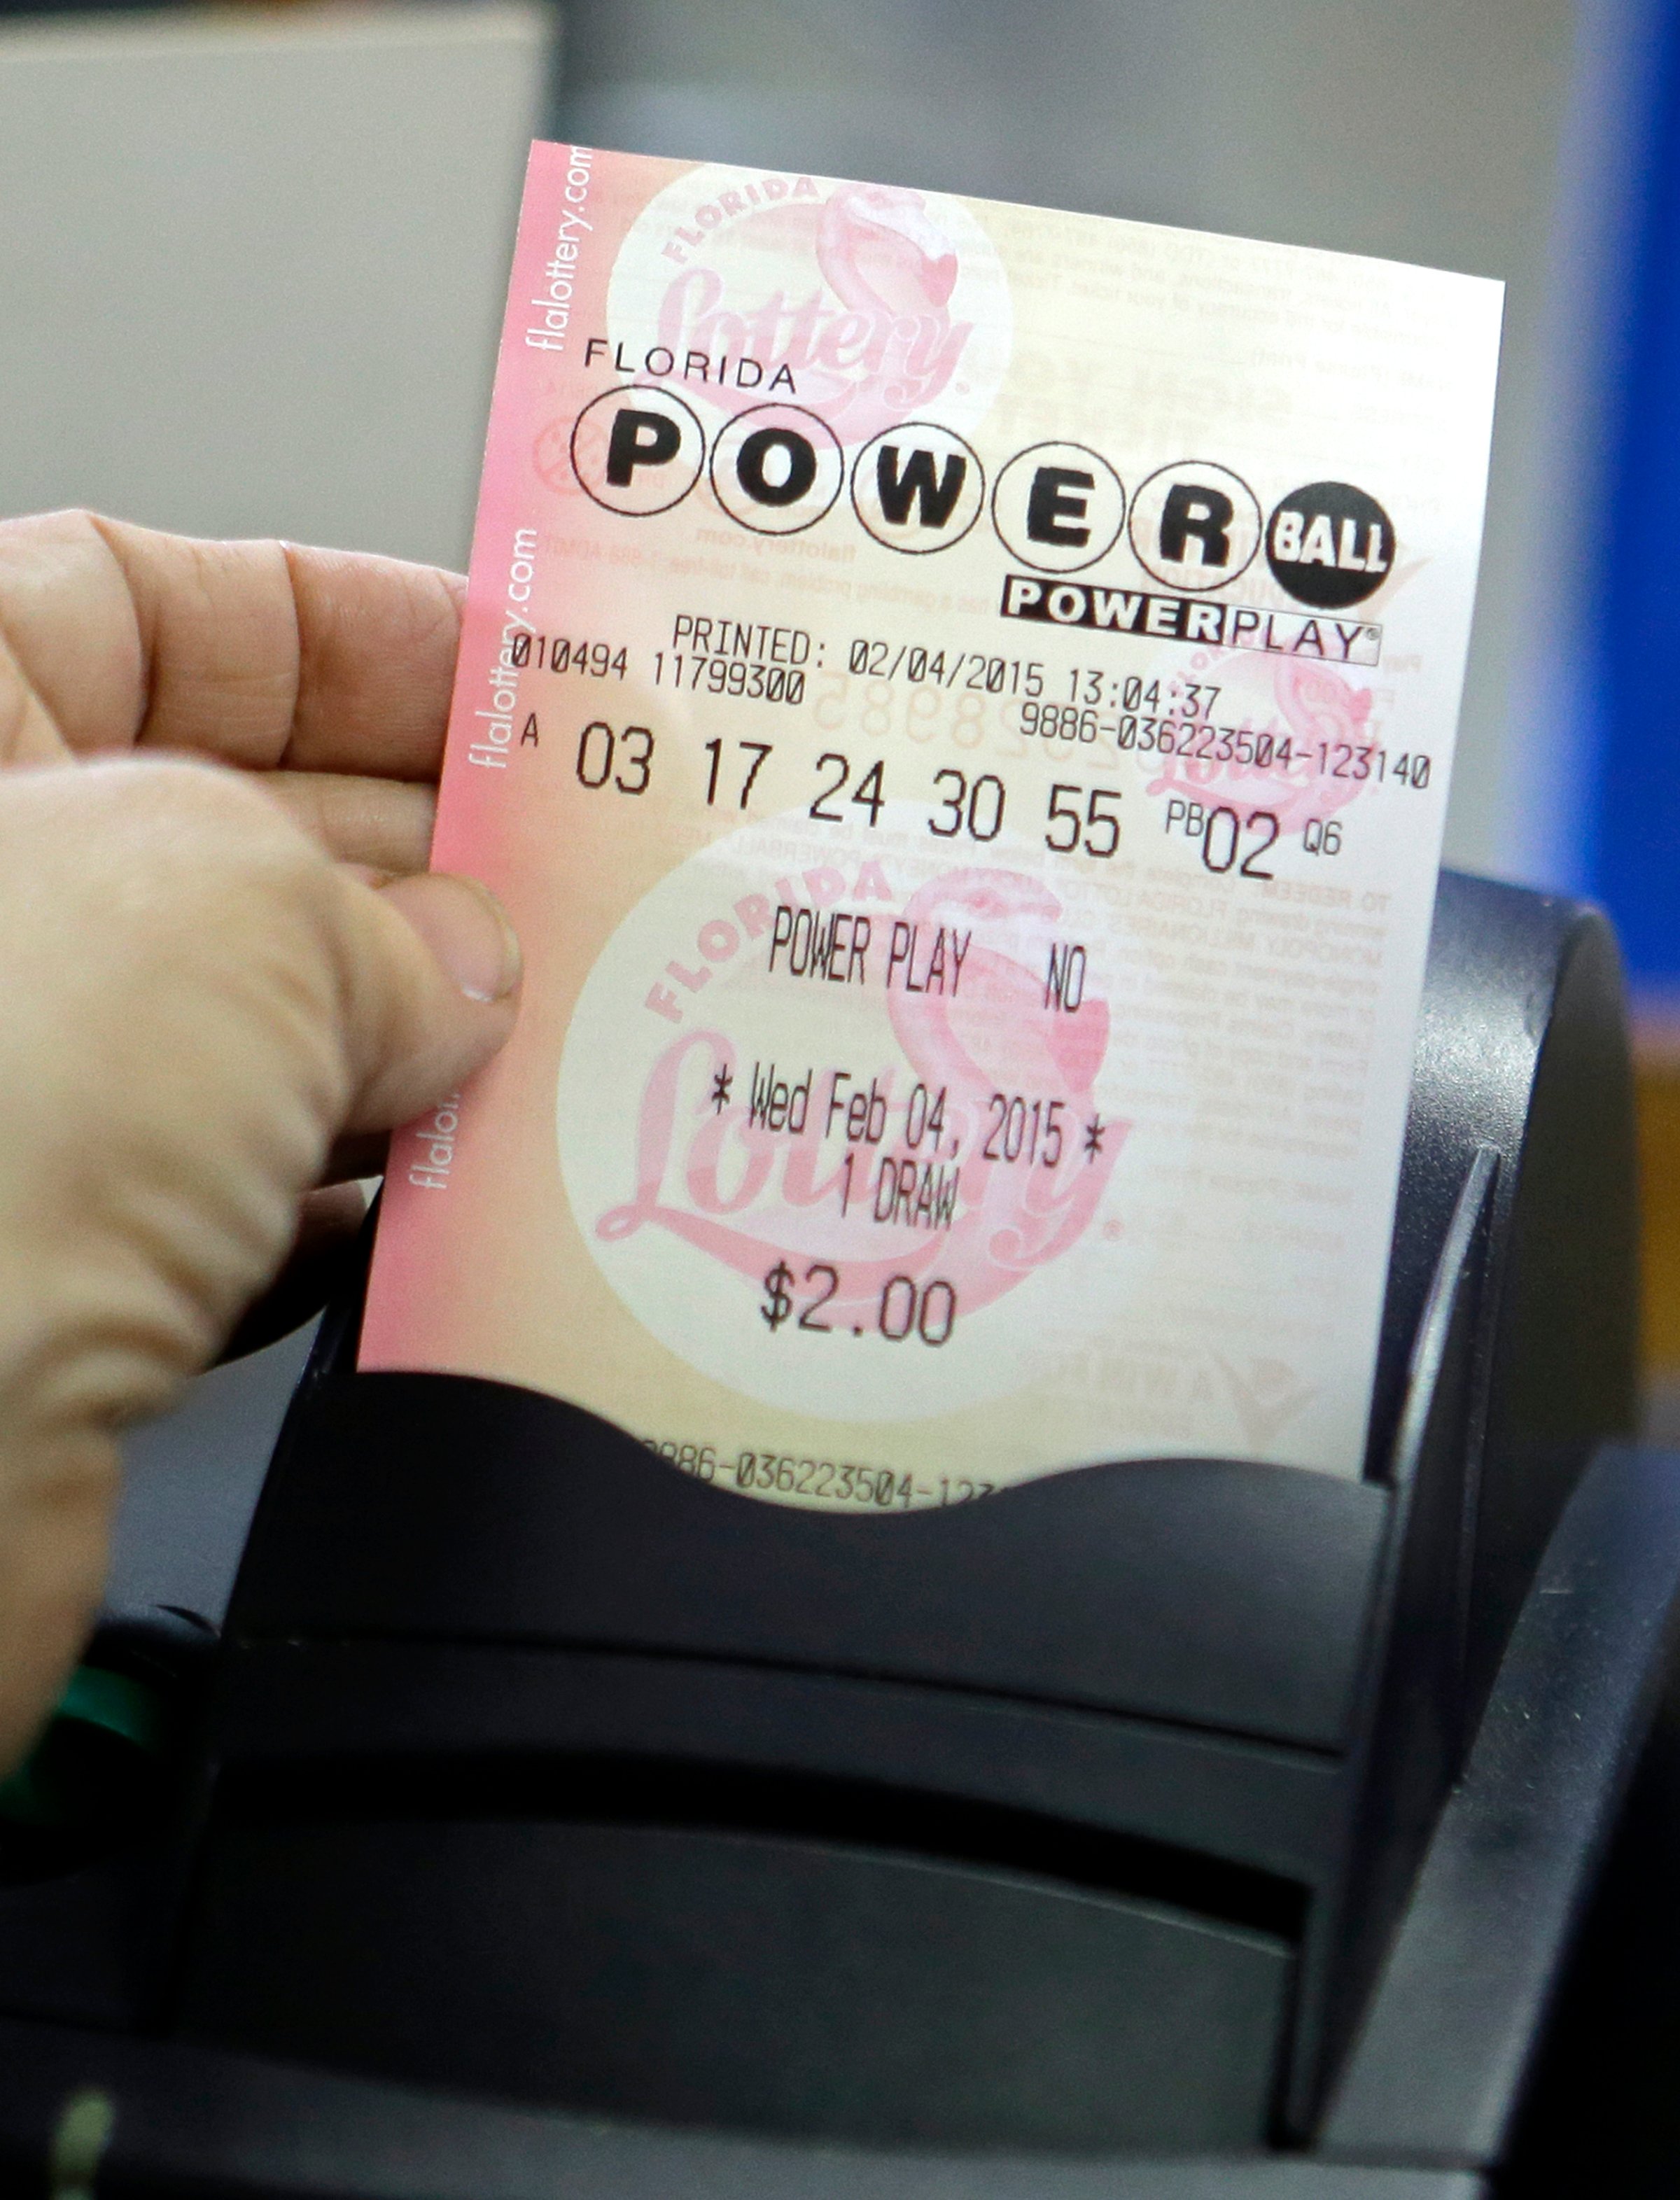 A store clerk pulls a Powerball ticket after being printed for a customer at a local grocery store in Hialeah, Fla. on Feb. 4, 2015.